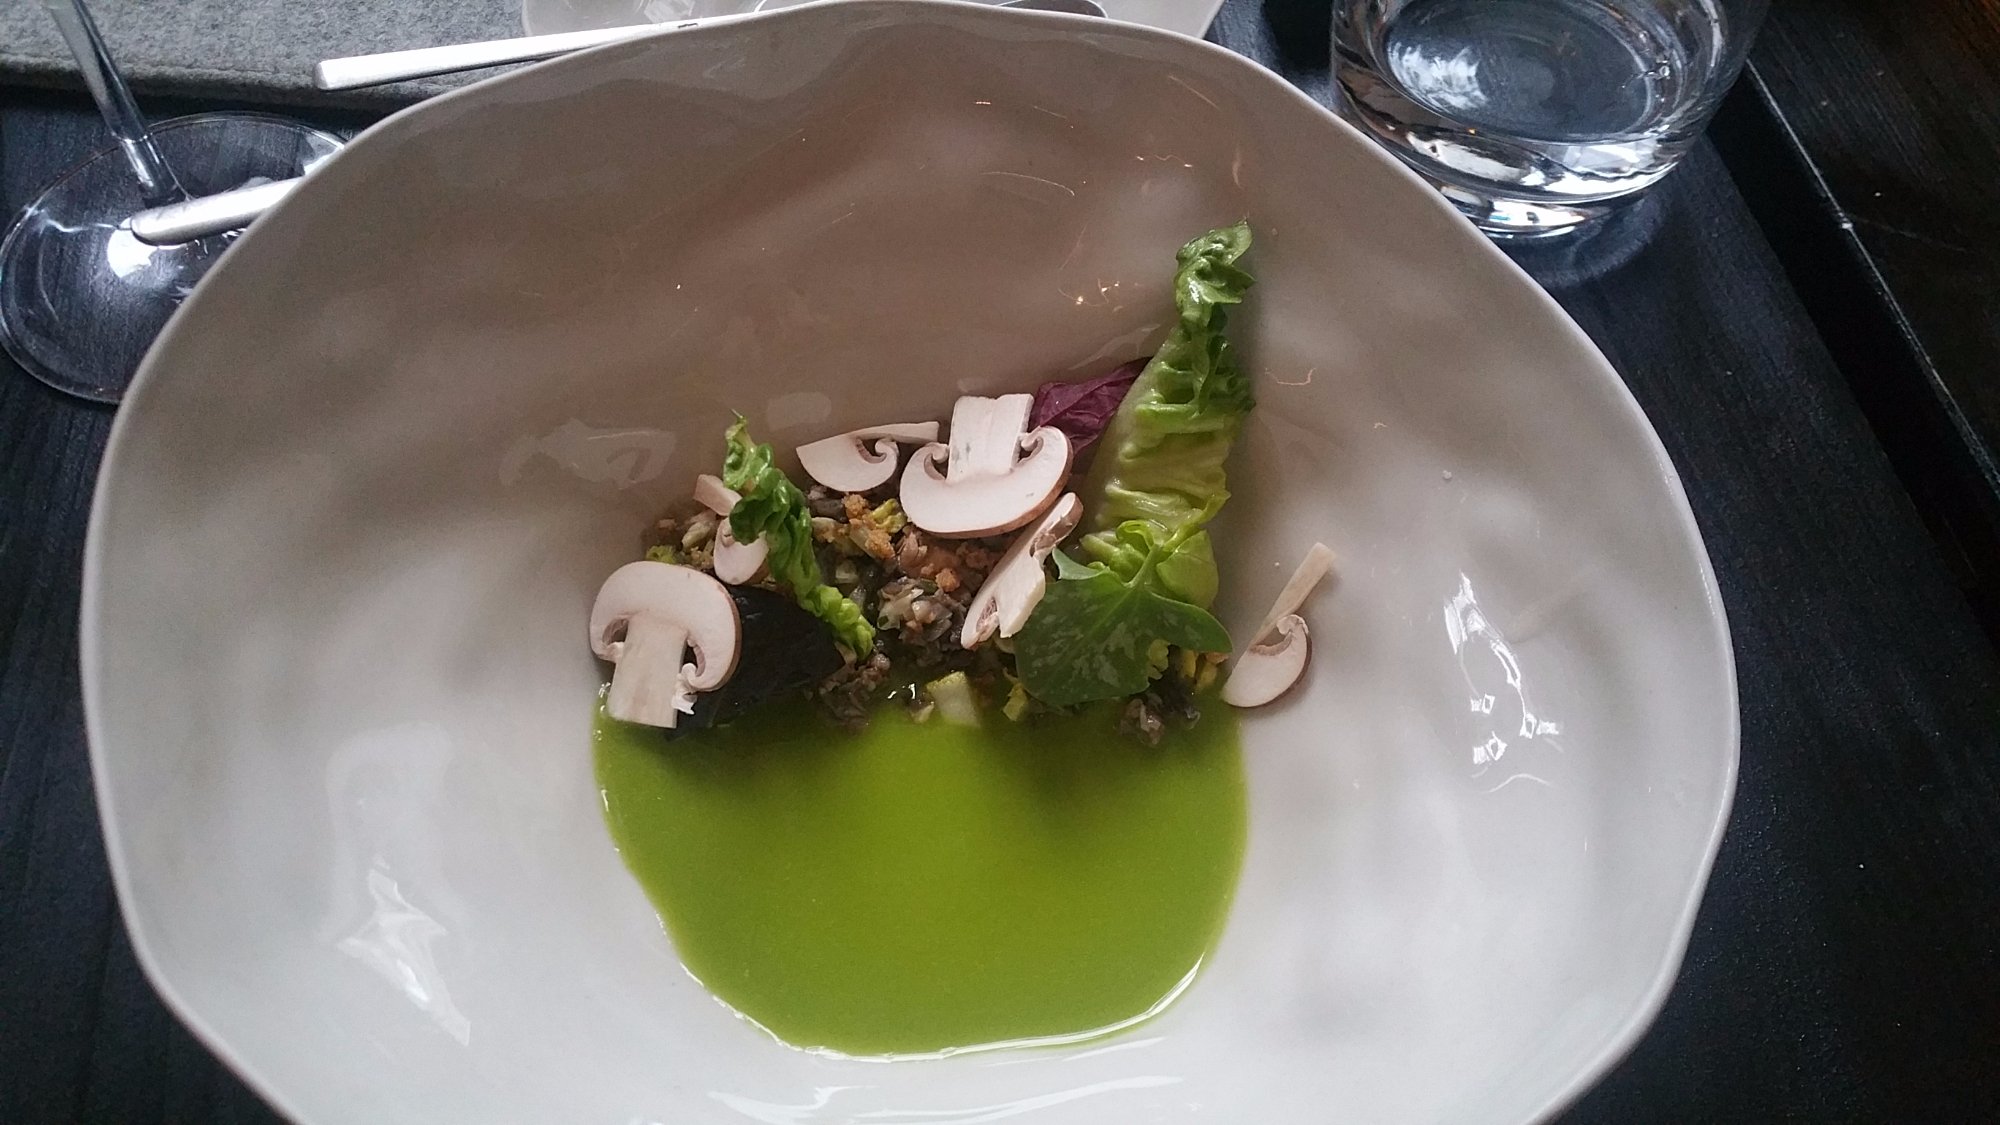 michelin starred pramerl the wolf a foodies review of viennas creative cuisine